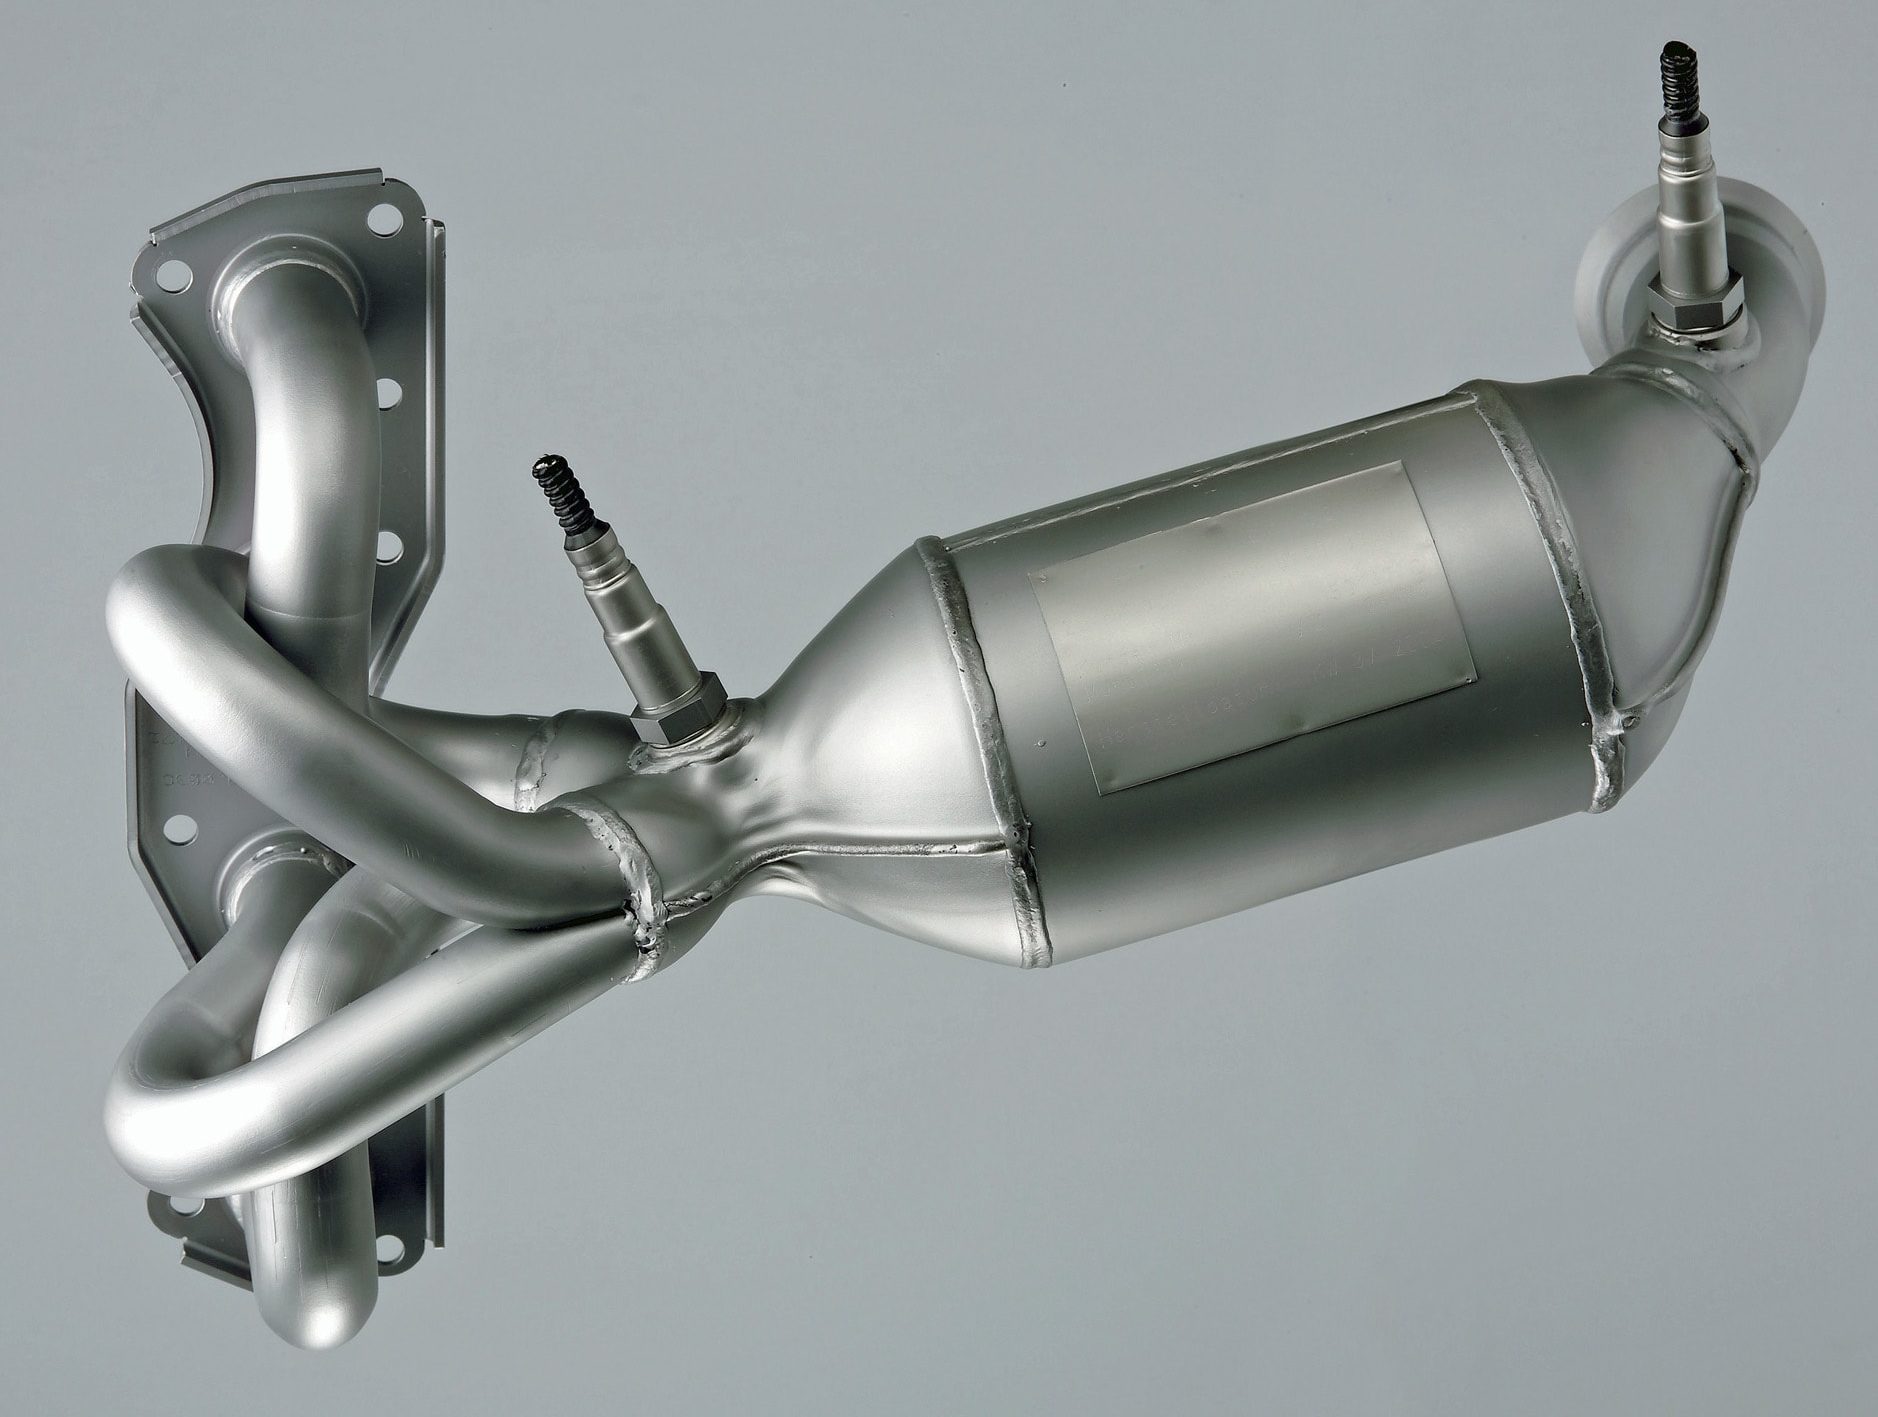 According to experts, the catalytic converter, which cleans the exhaust gases of the gasoline engine, is problematic.